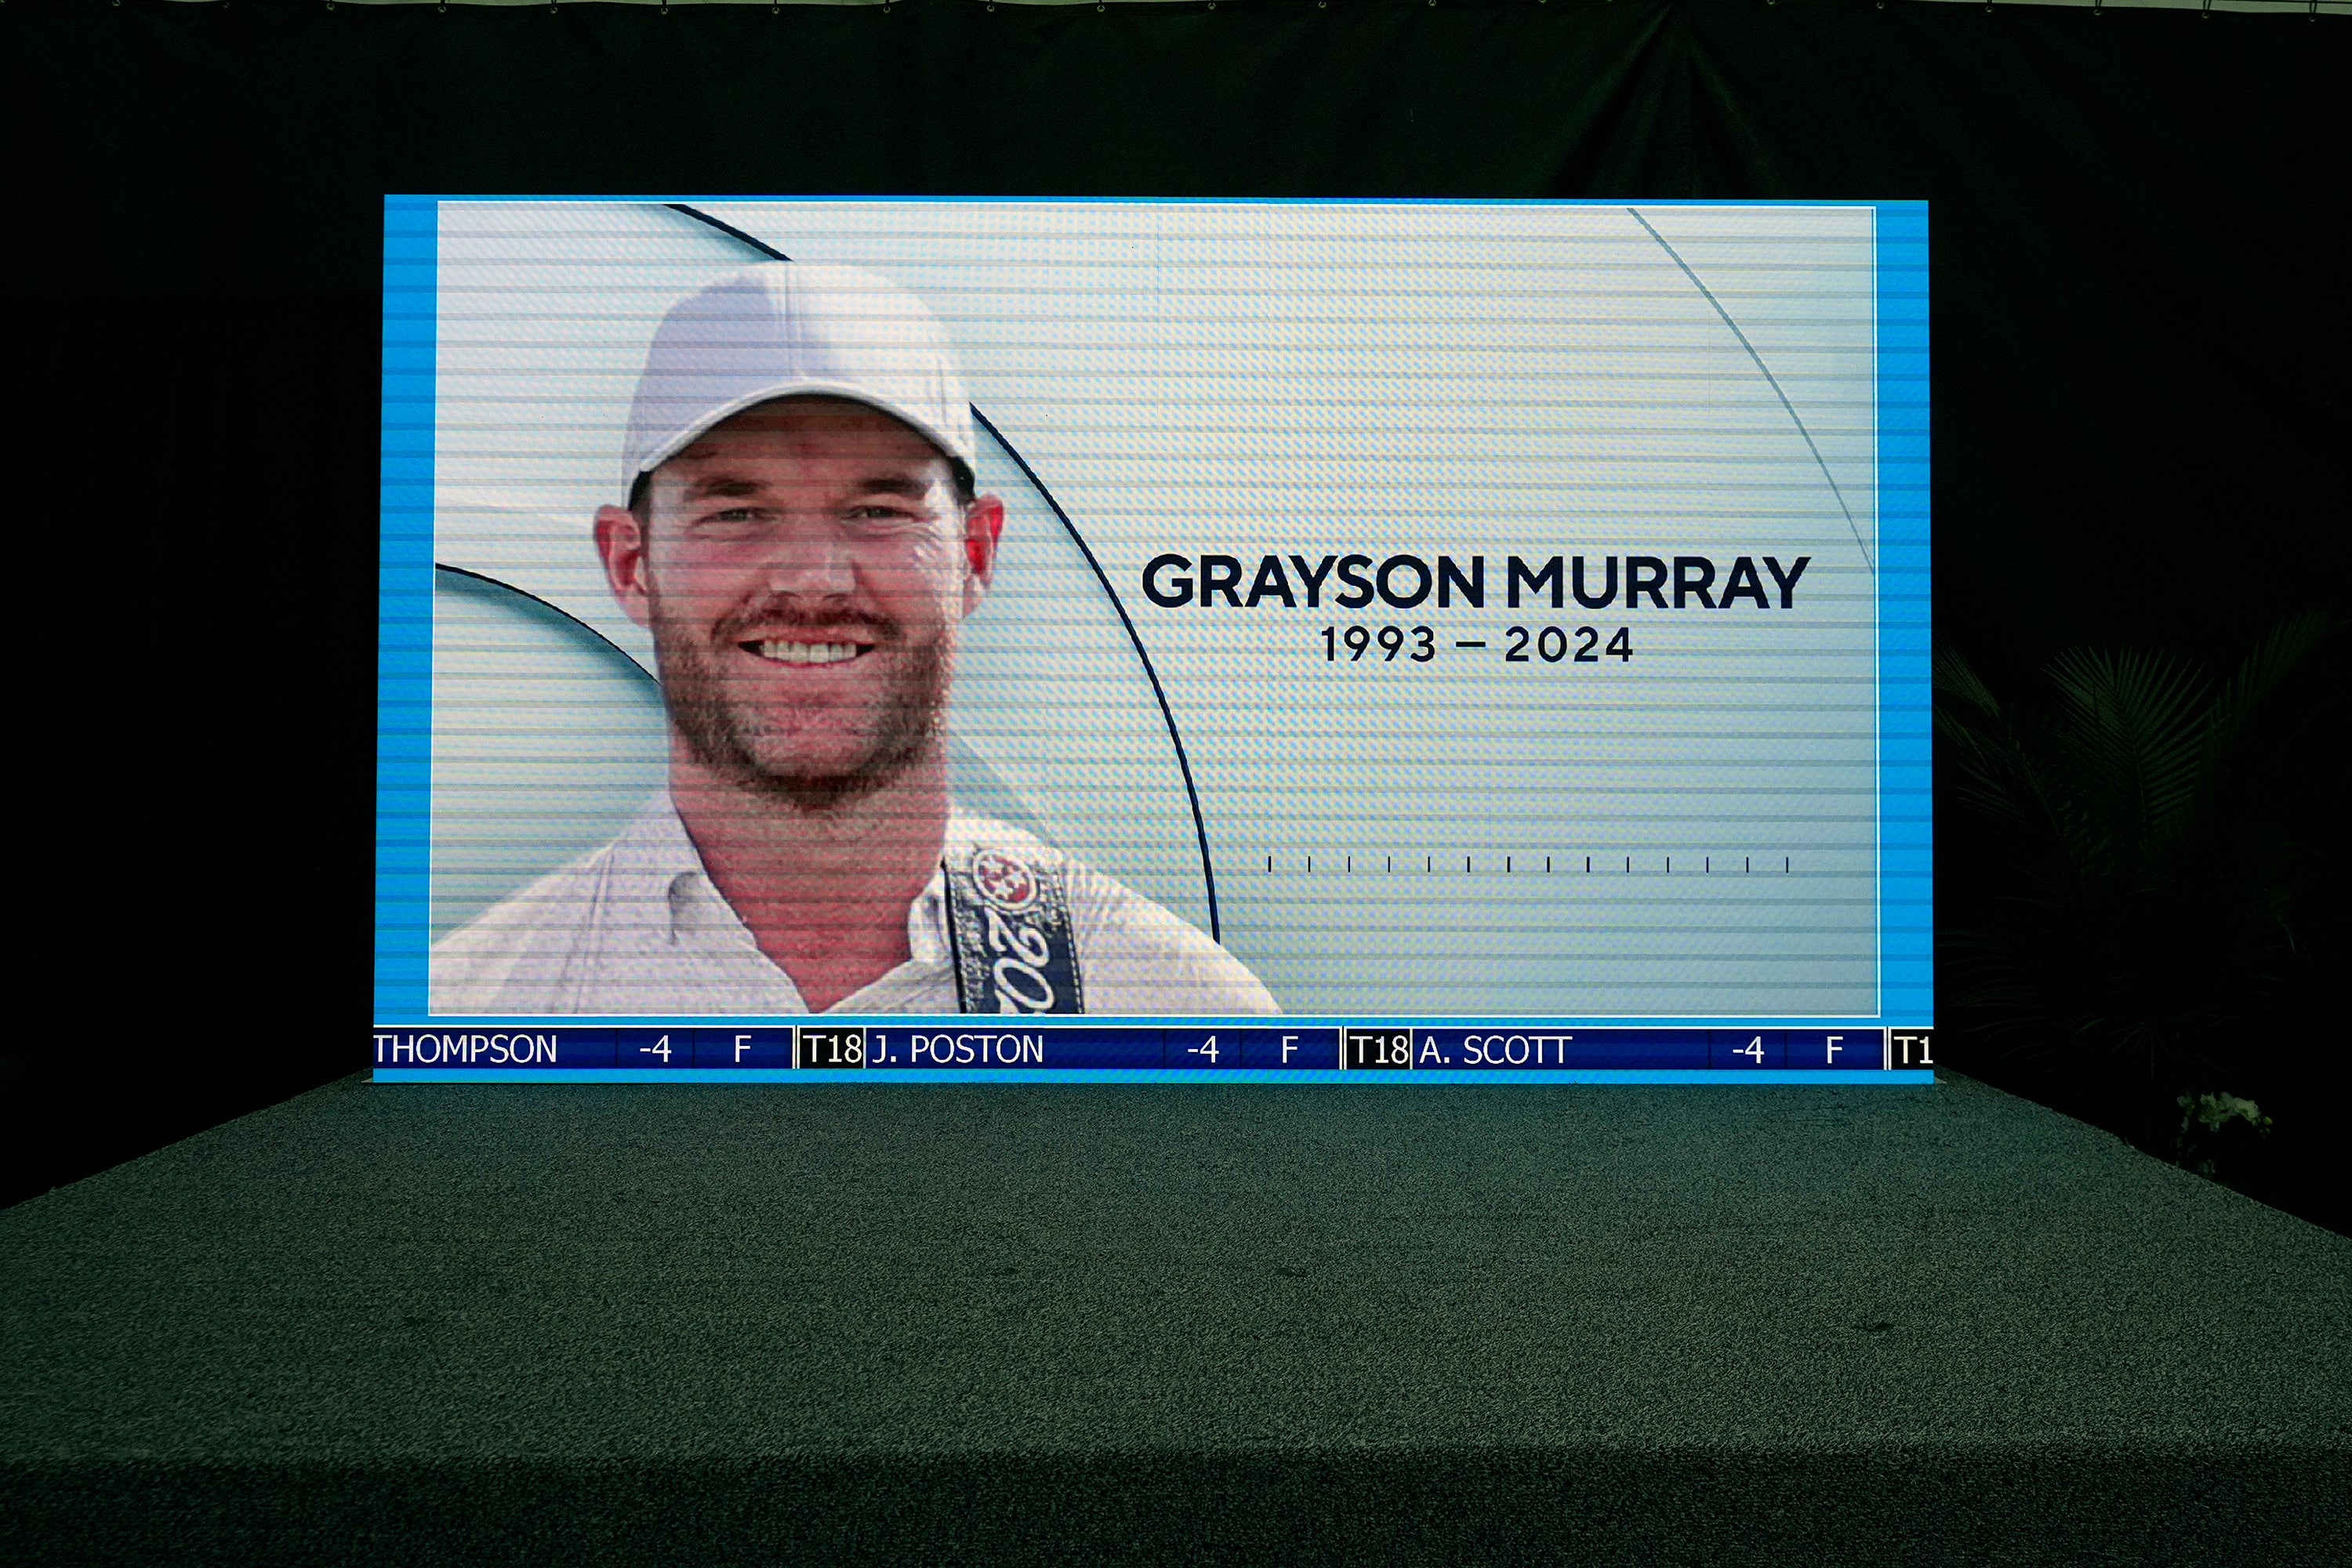 A golf broadcast by CBS is played on an empty stage at the media center showing a photo of Grayson Murray eiqruidtrirhinv